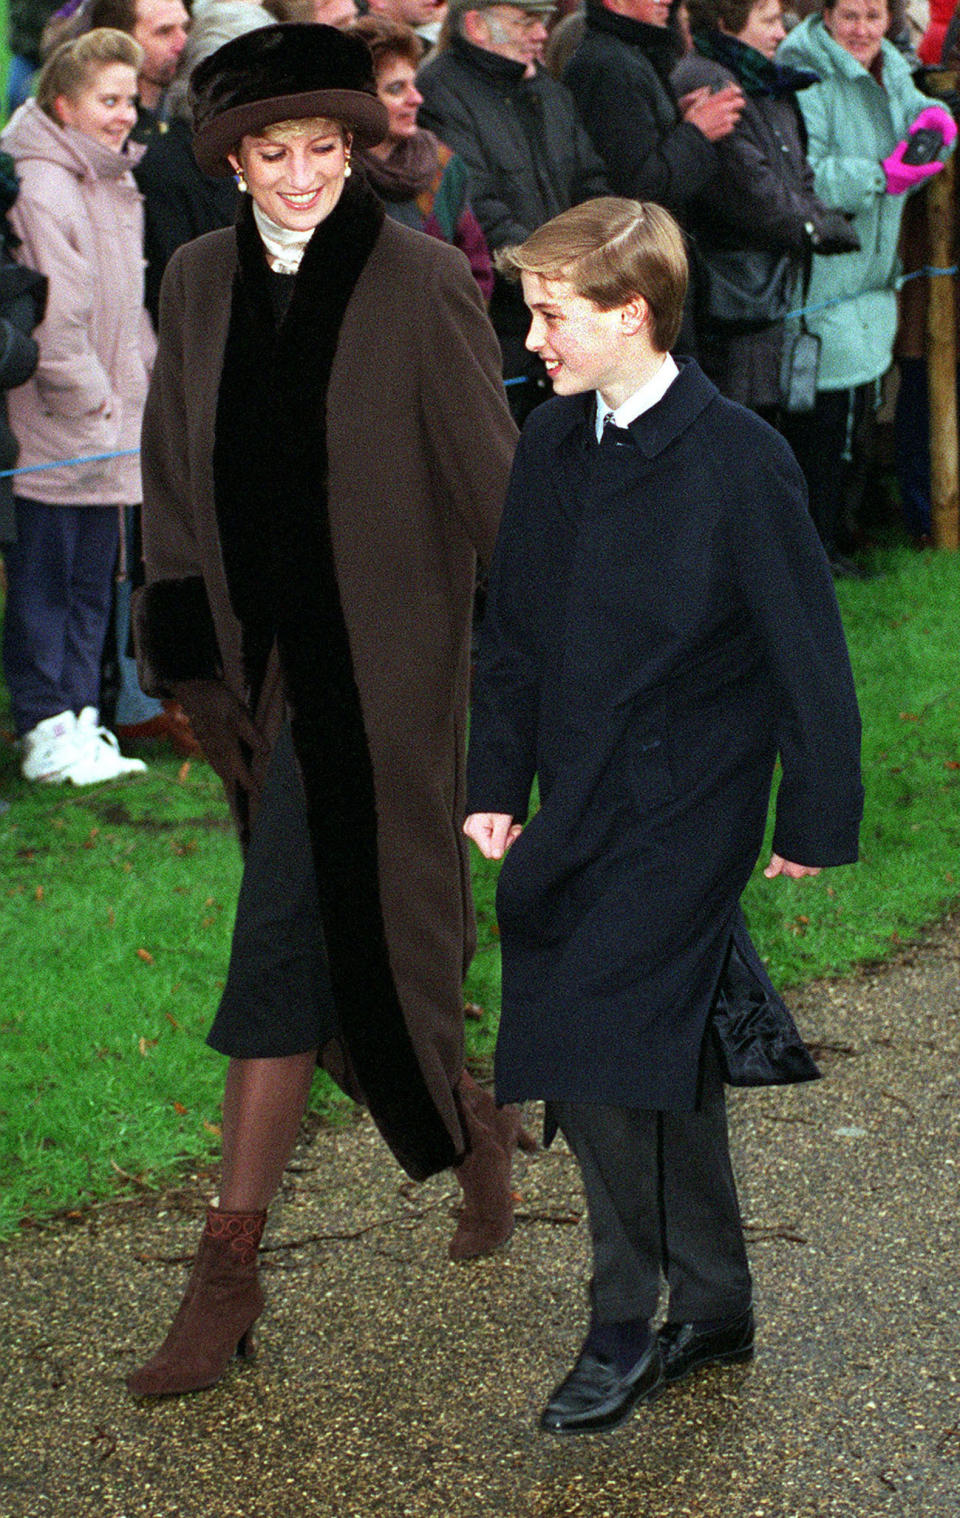 Princess Diana (1961 - 1997) on her way to Sandringham Church with Prince William for a Christmas Day service, 25th December 1994. (Terry Fincher / Getty Images)